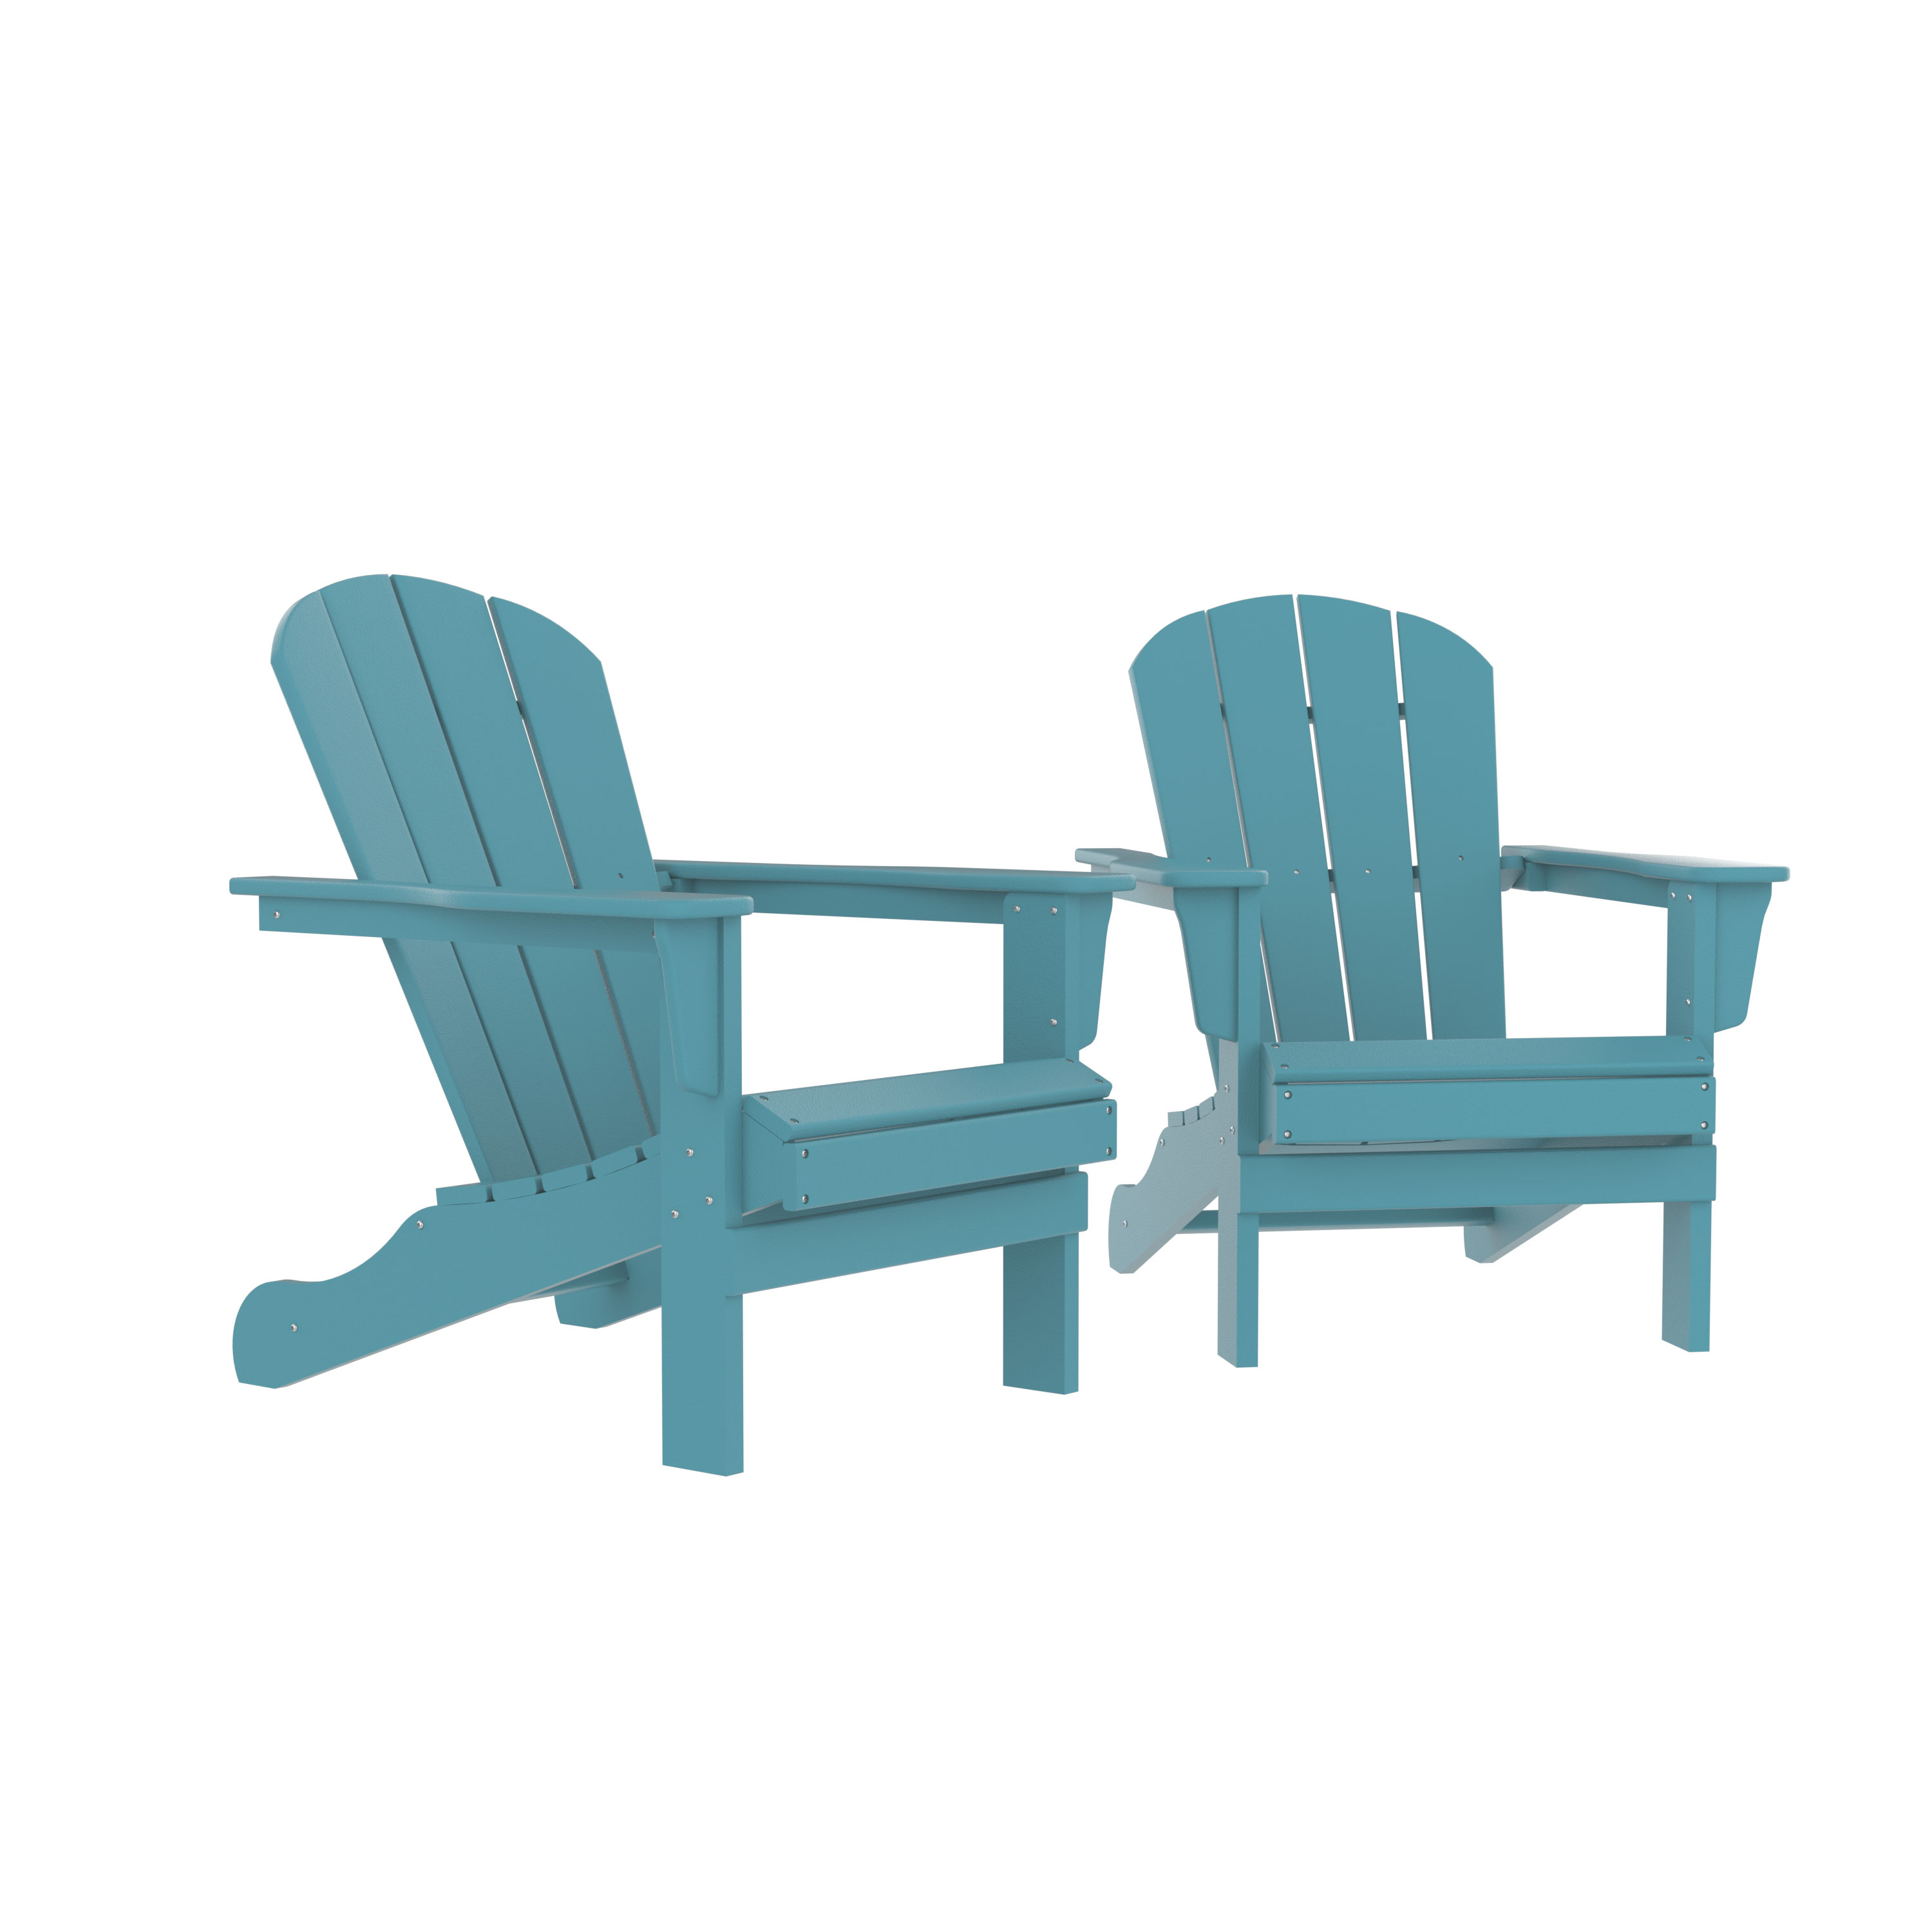 Adirondack Chair, Fire Pit Chairs, Sand Chair, Patio Outdoor Chairs, Dpe Plastic Resin Deck Chair, Lawn Chairs, Adult Size, Weather Resistant For Patio/ Backyard/Garden, Blue, Set Of 2 - image 1 of 6